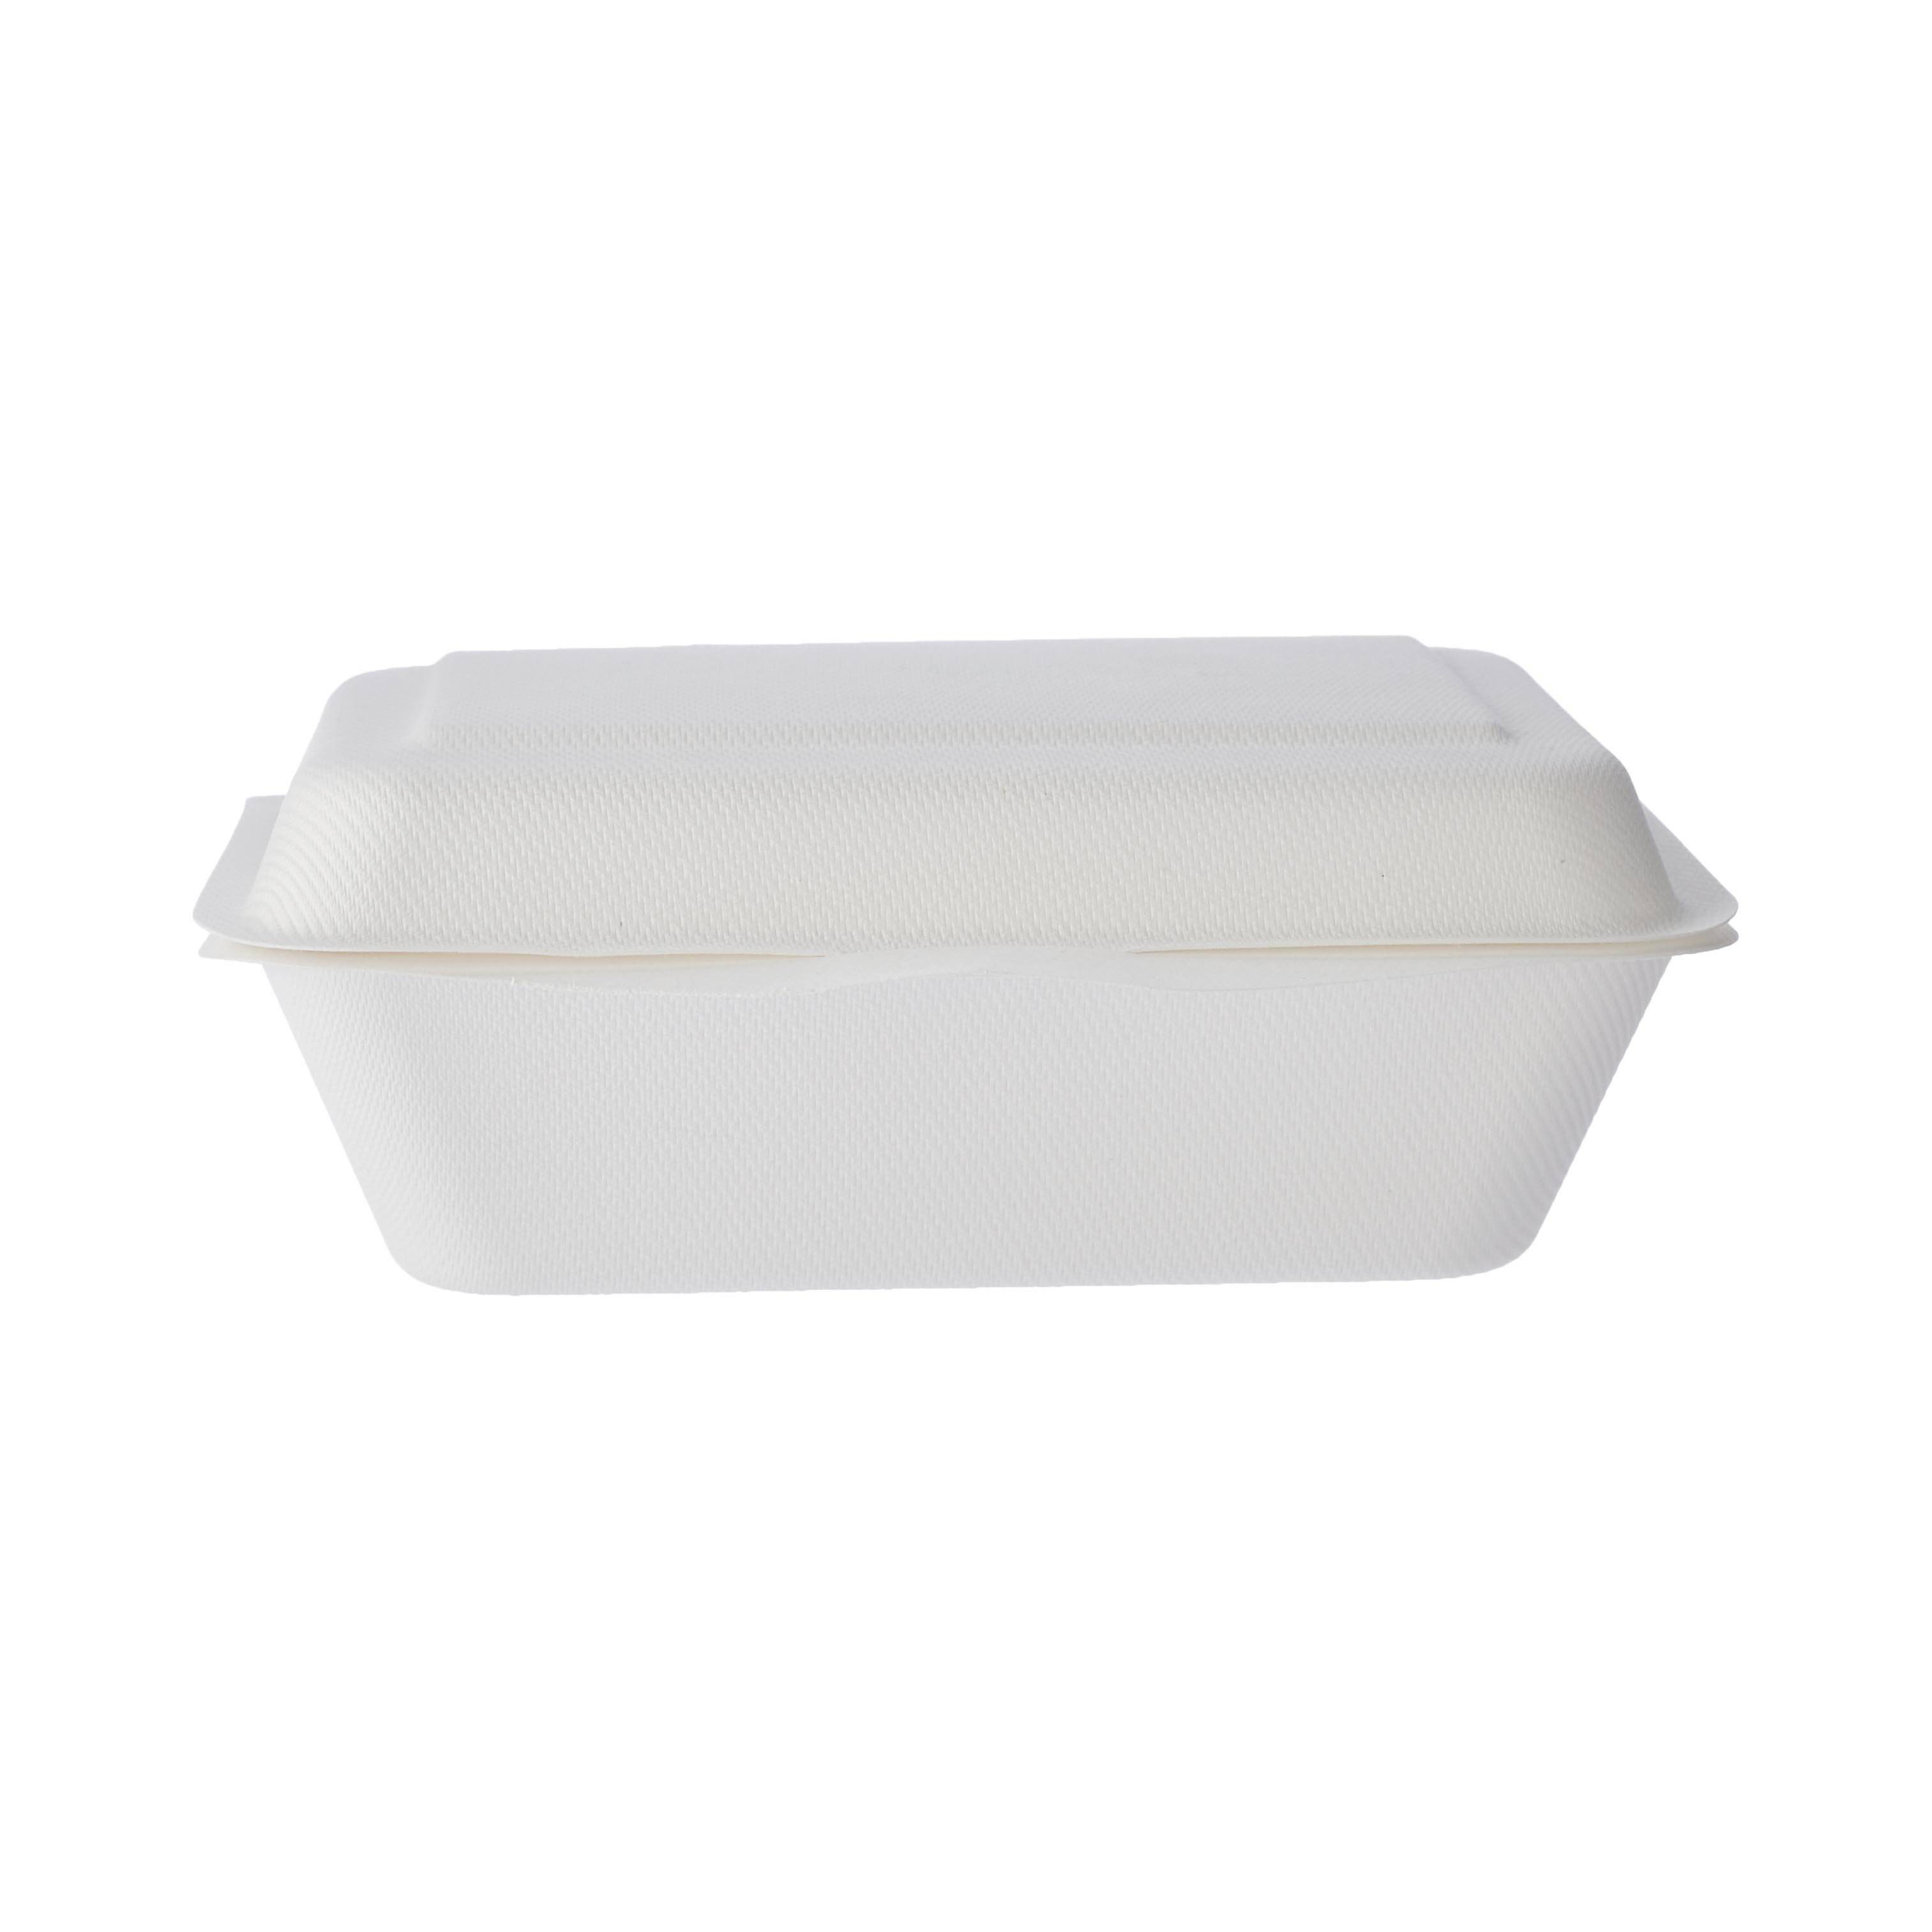 500 Pieces Bio-Degradable Hinged Container 7x5 Inch